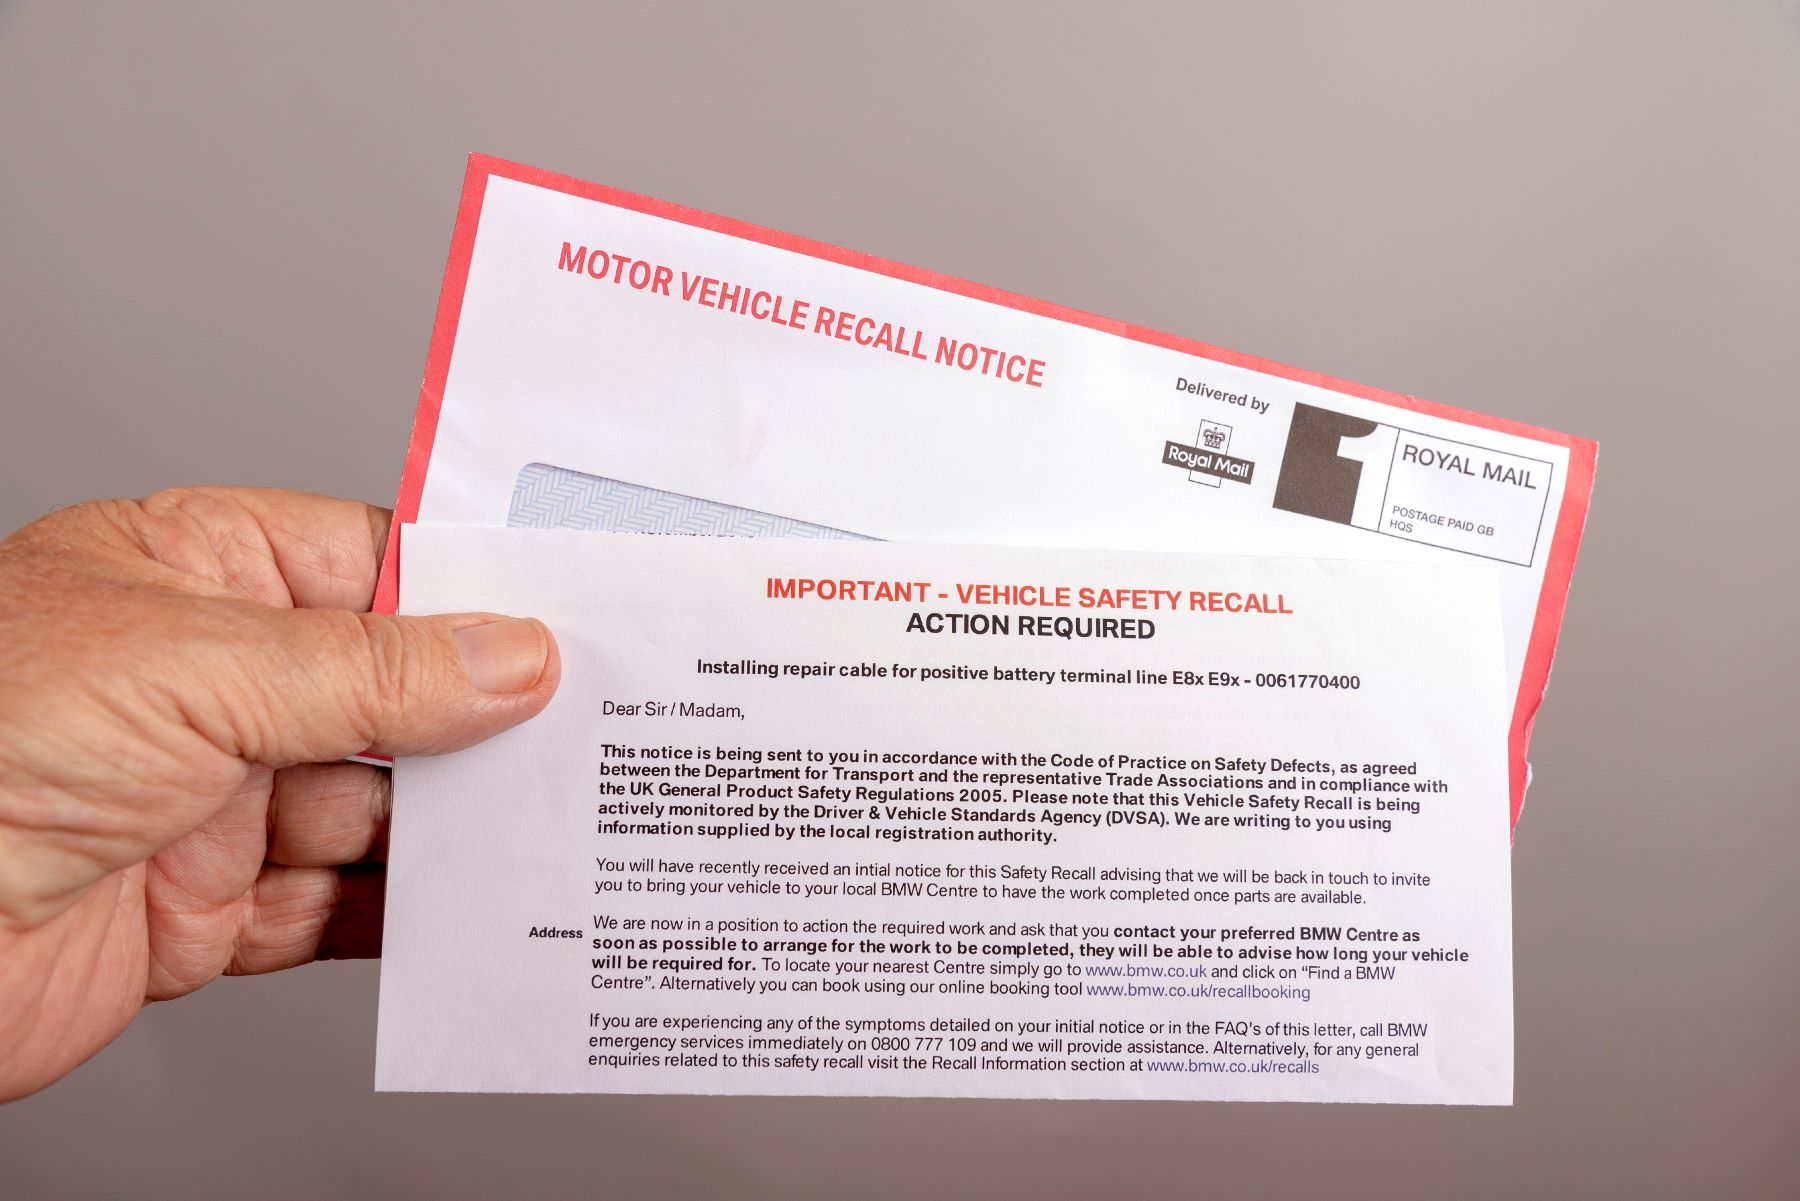 A U.K. car safety recall notification letter sent by mail